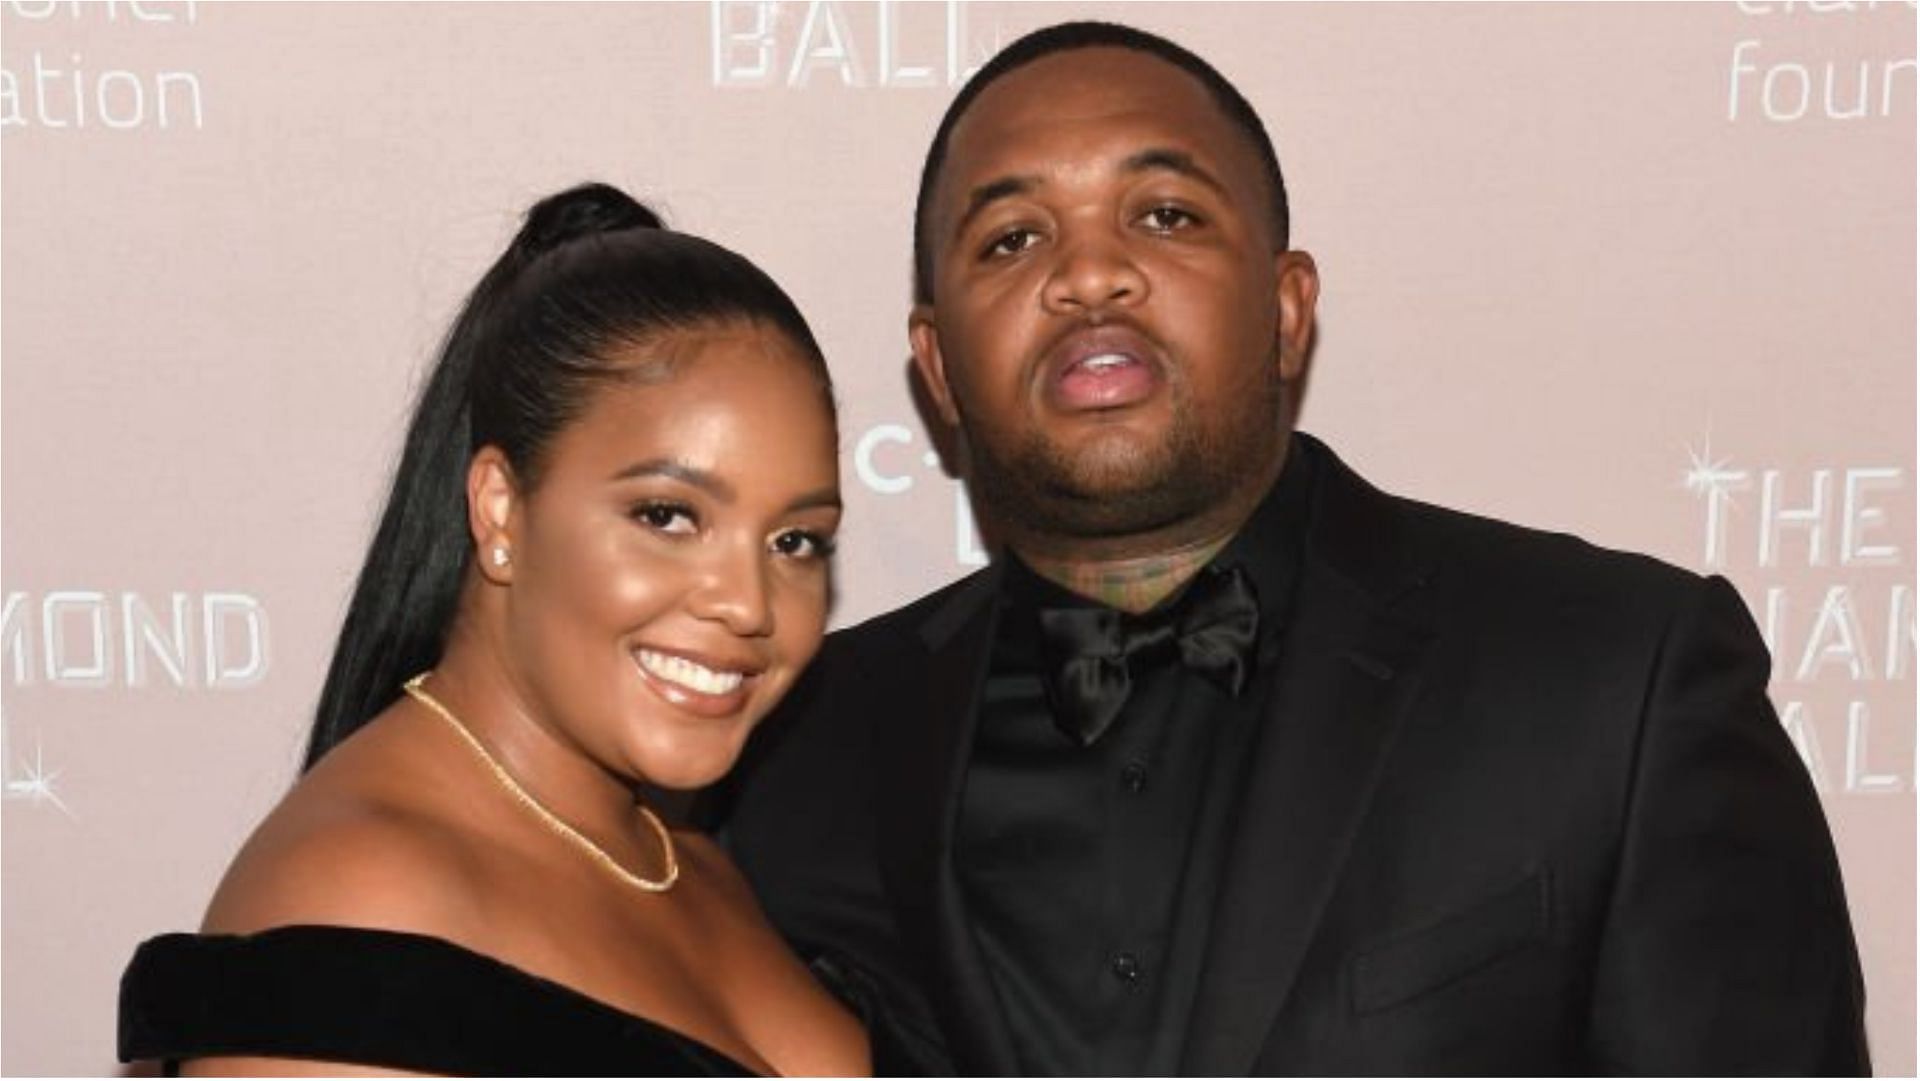 Chanel Thierry has asked for a child support of $80,000 from ex-husband DJ Mustard (Image via Dimitrios Kambouris/Getty Images)